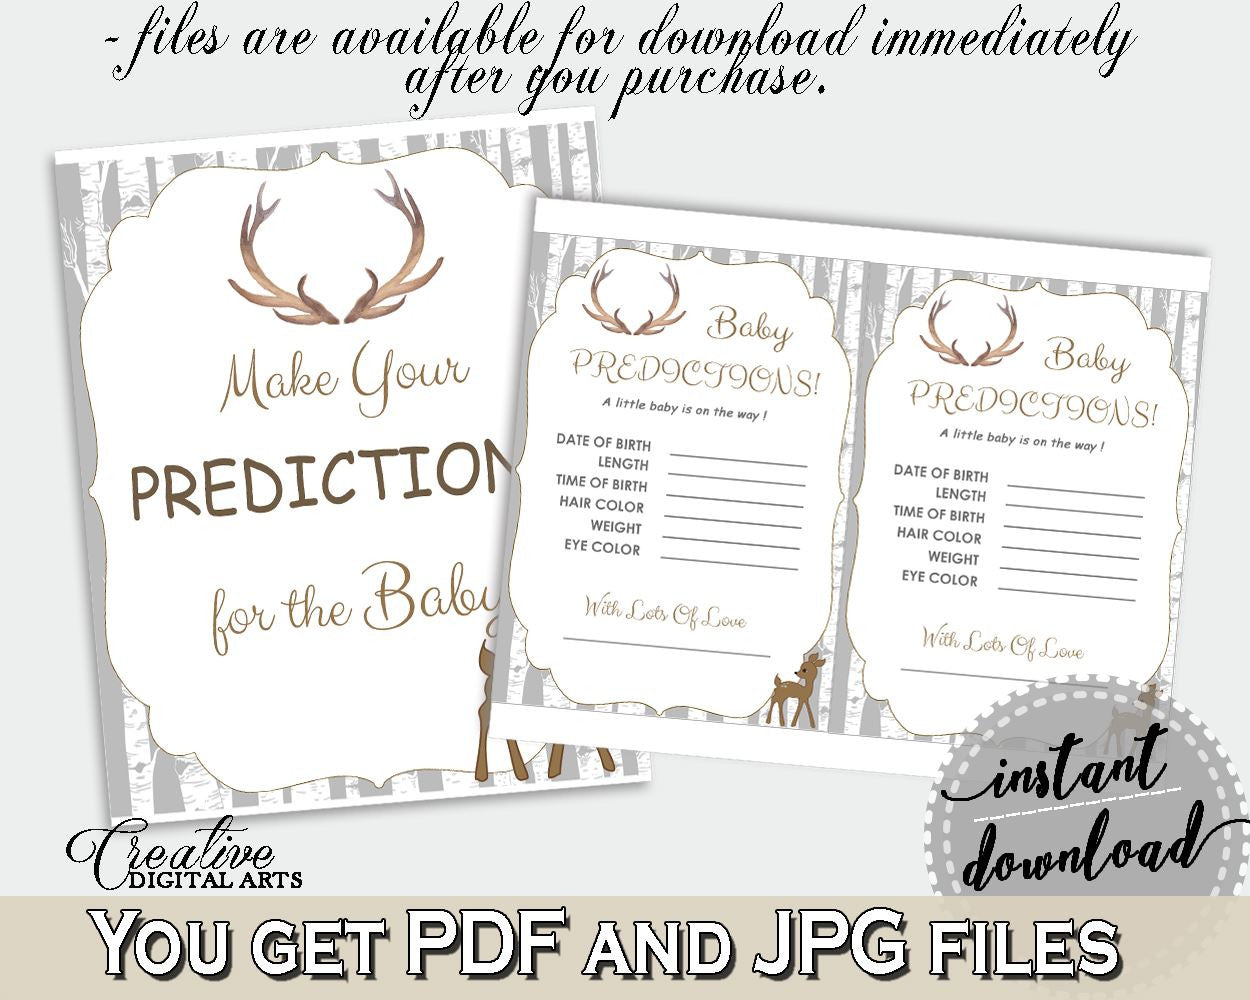 Baby Predictions Baby Shower Baby Predictions Deer Baby Shower Baby Predictions Baby Shower Deer Baby Predictions Gray Brown prints Z20R3 - Digital Product